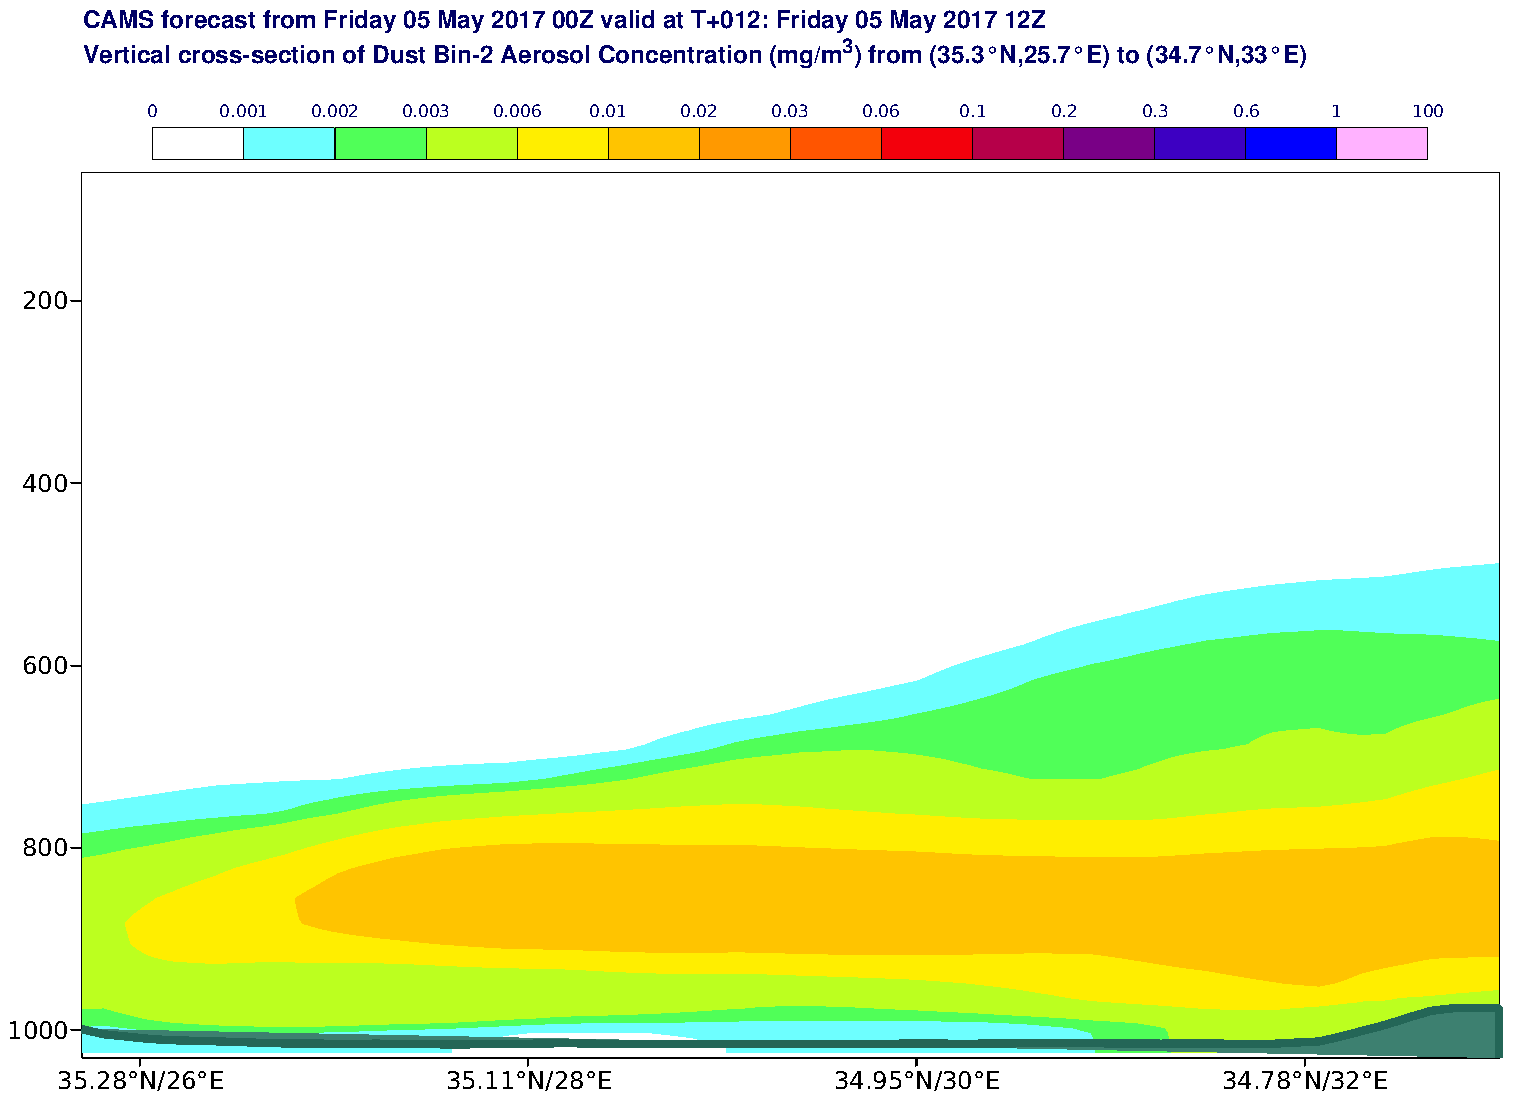 Vertical cross-section of Dust Bin-2 Aerosol Concentration (mg/m3) valid at T12 - 2017-05-05 12:00